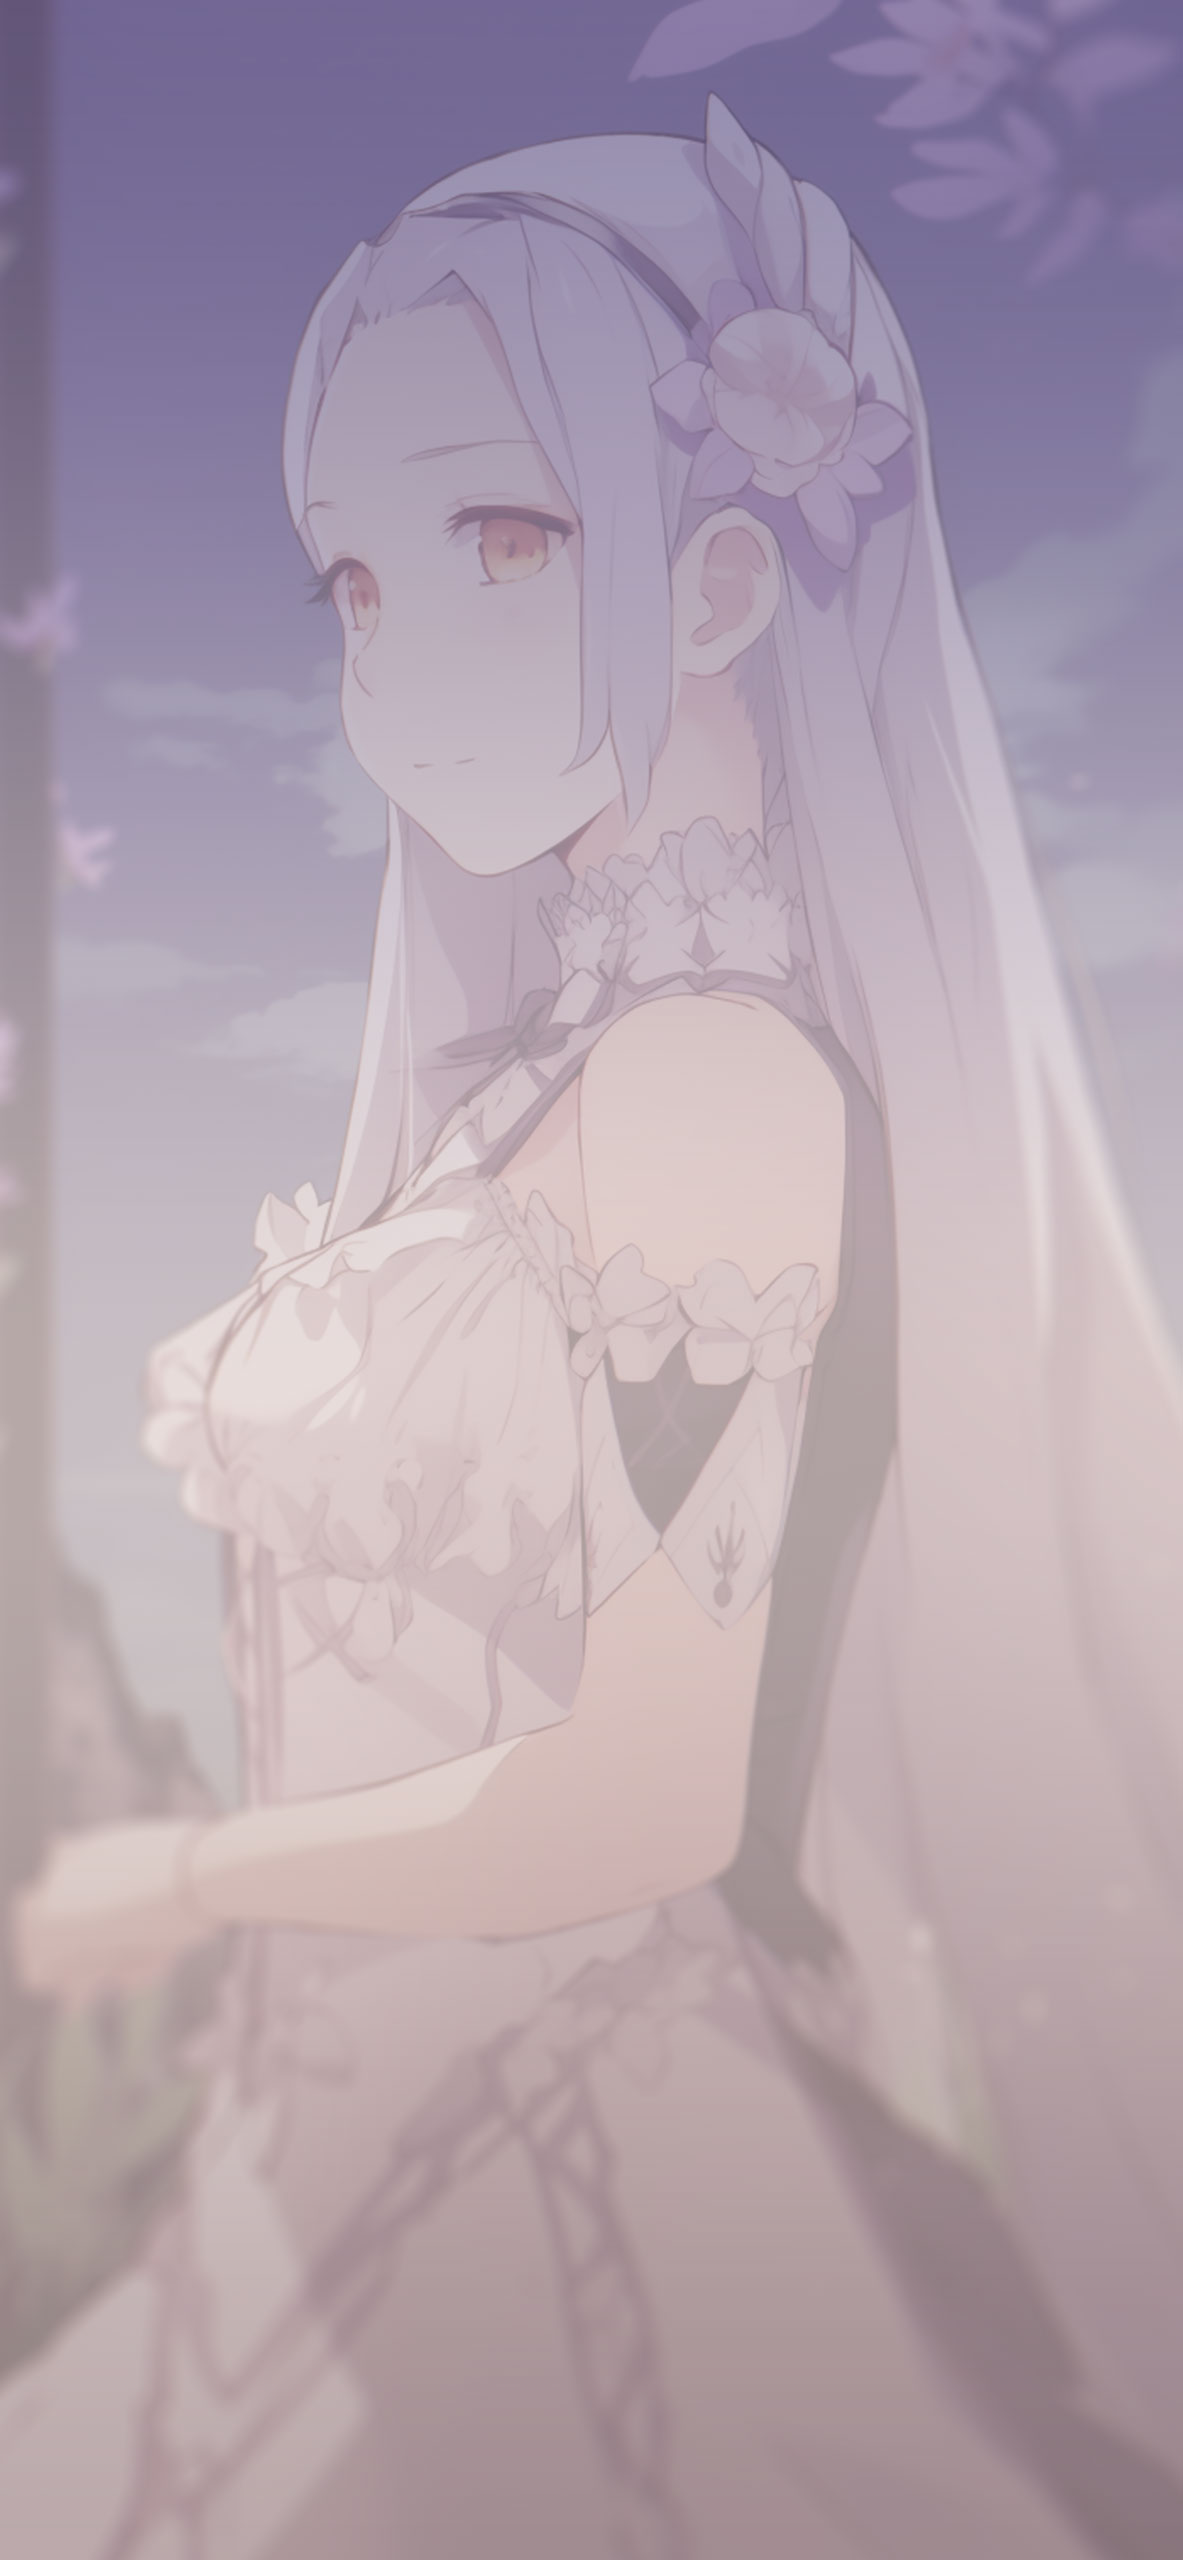 Re:Zero Emilia Anime Wallpapers - Anime Wallpapers for iPhone